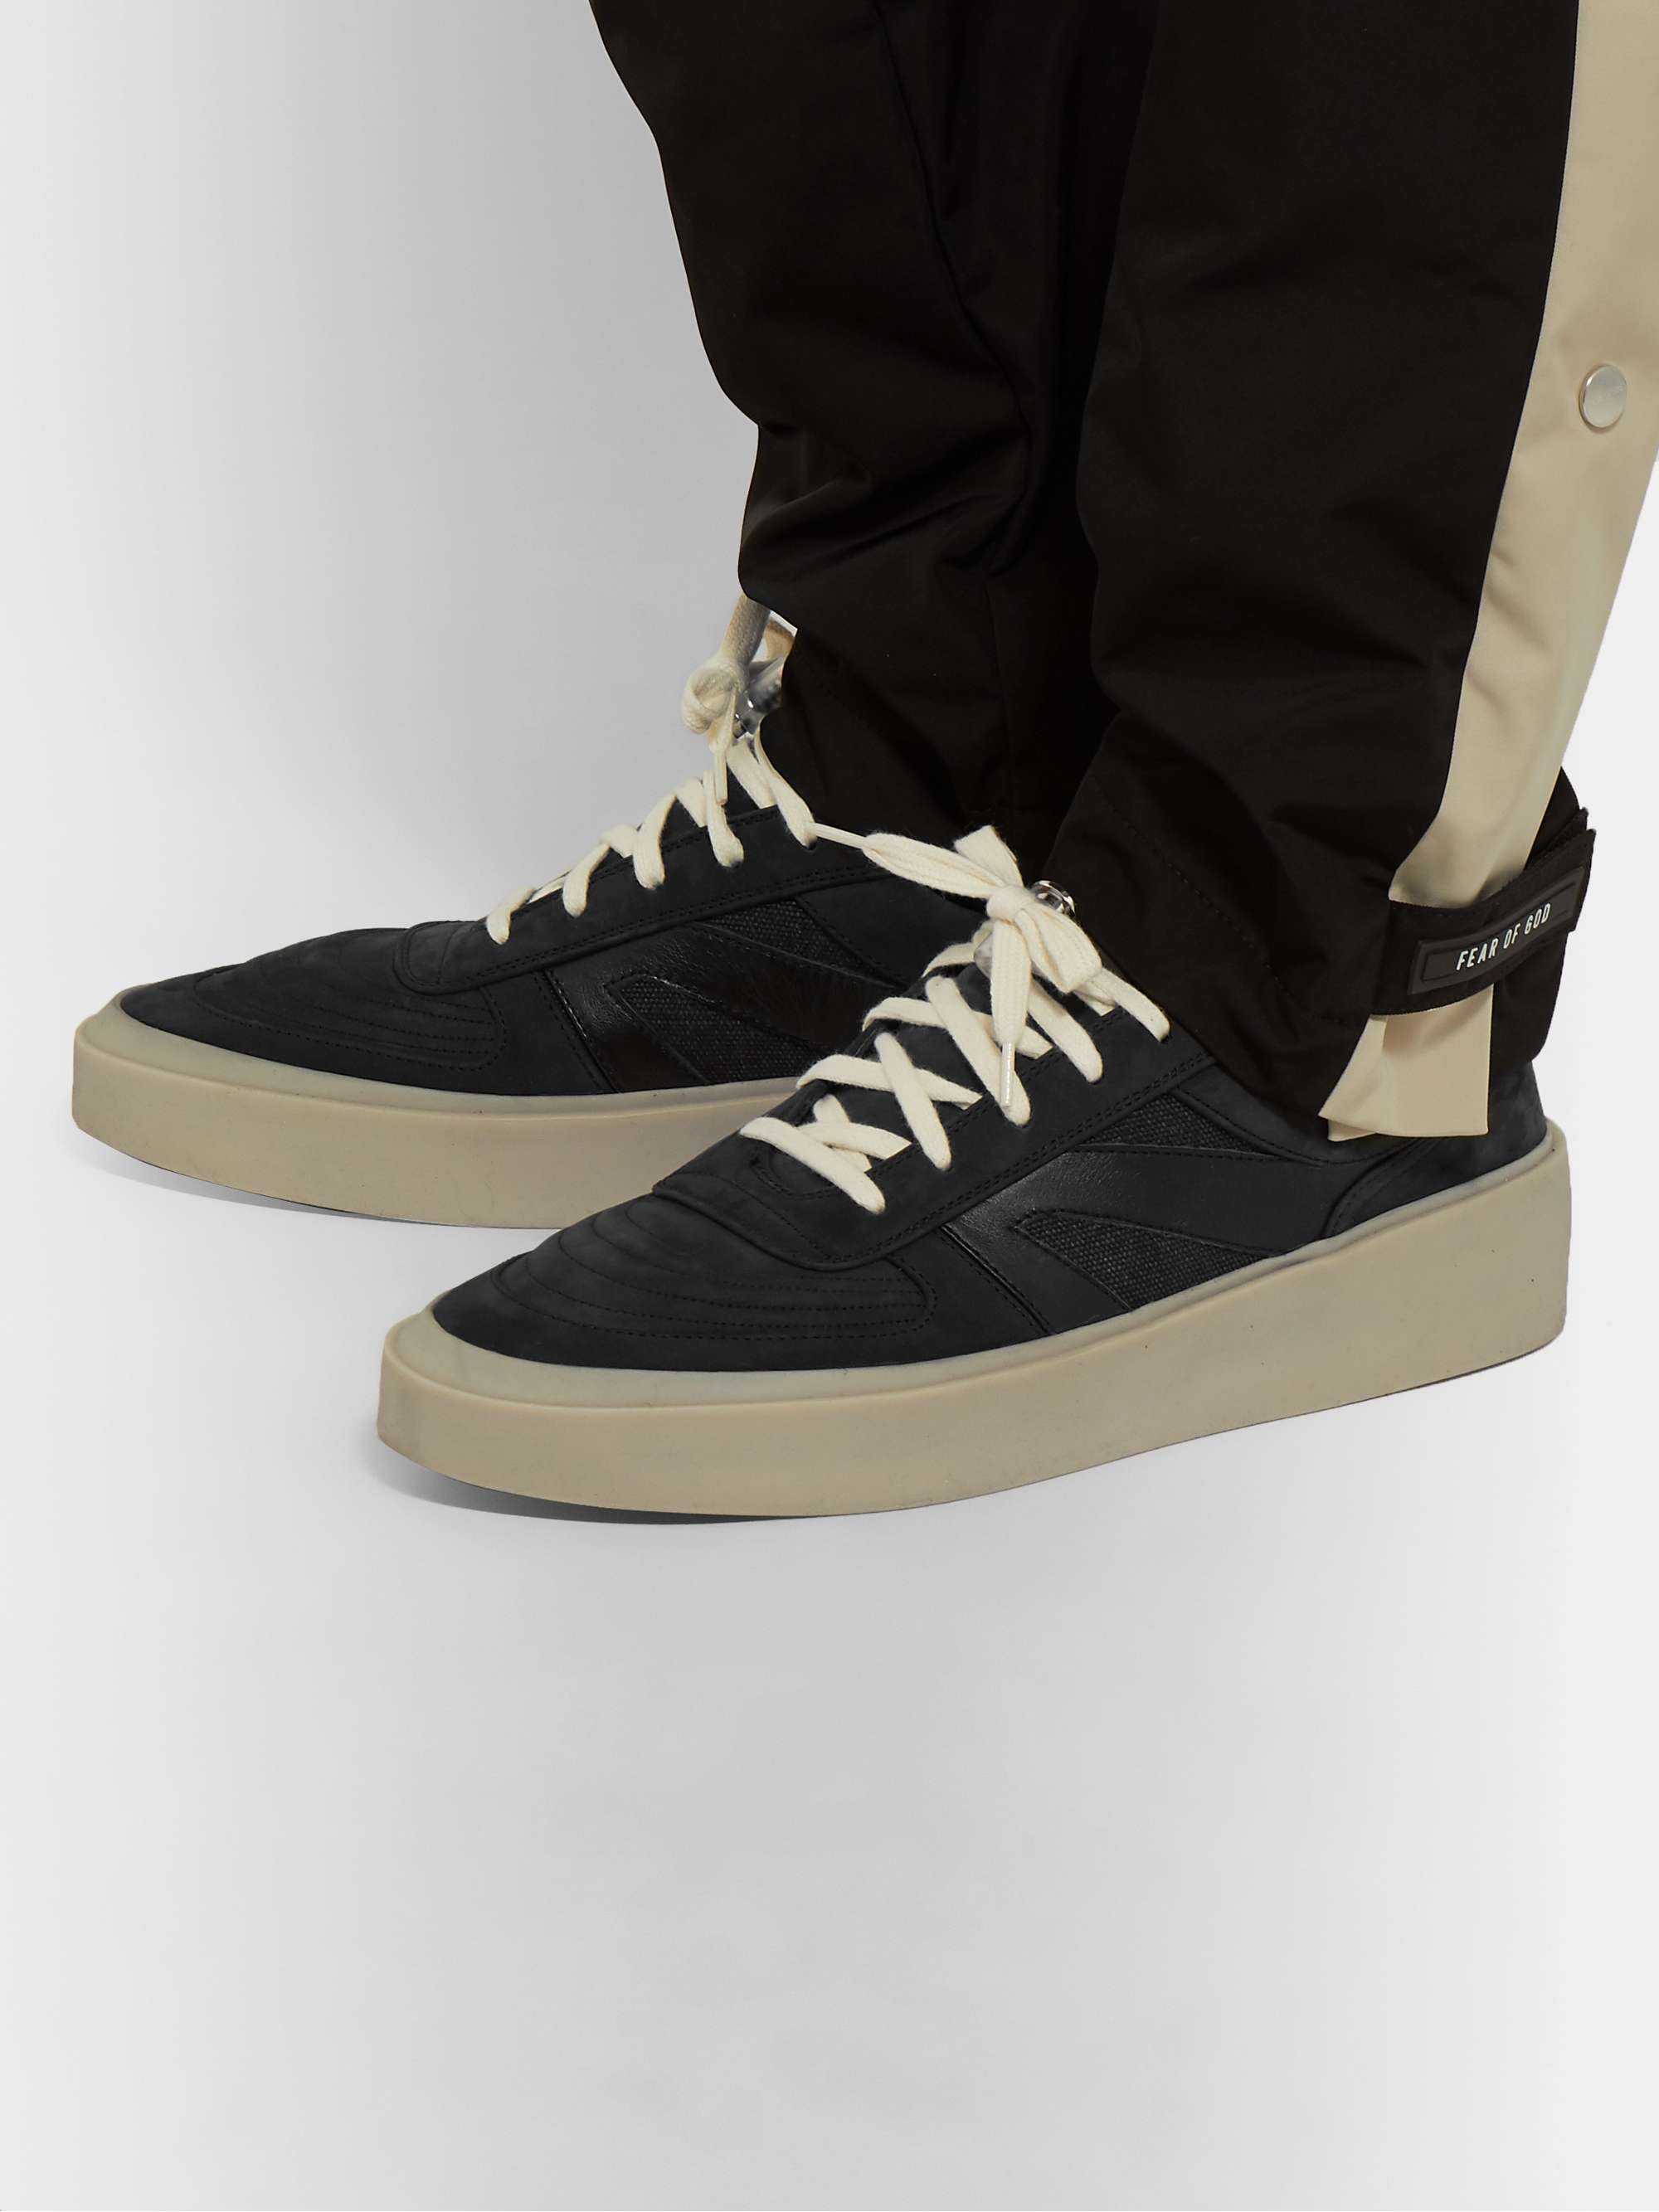 FEAR OF GOD Leather, Nubuck and Mesh Sneakers